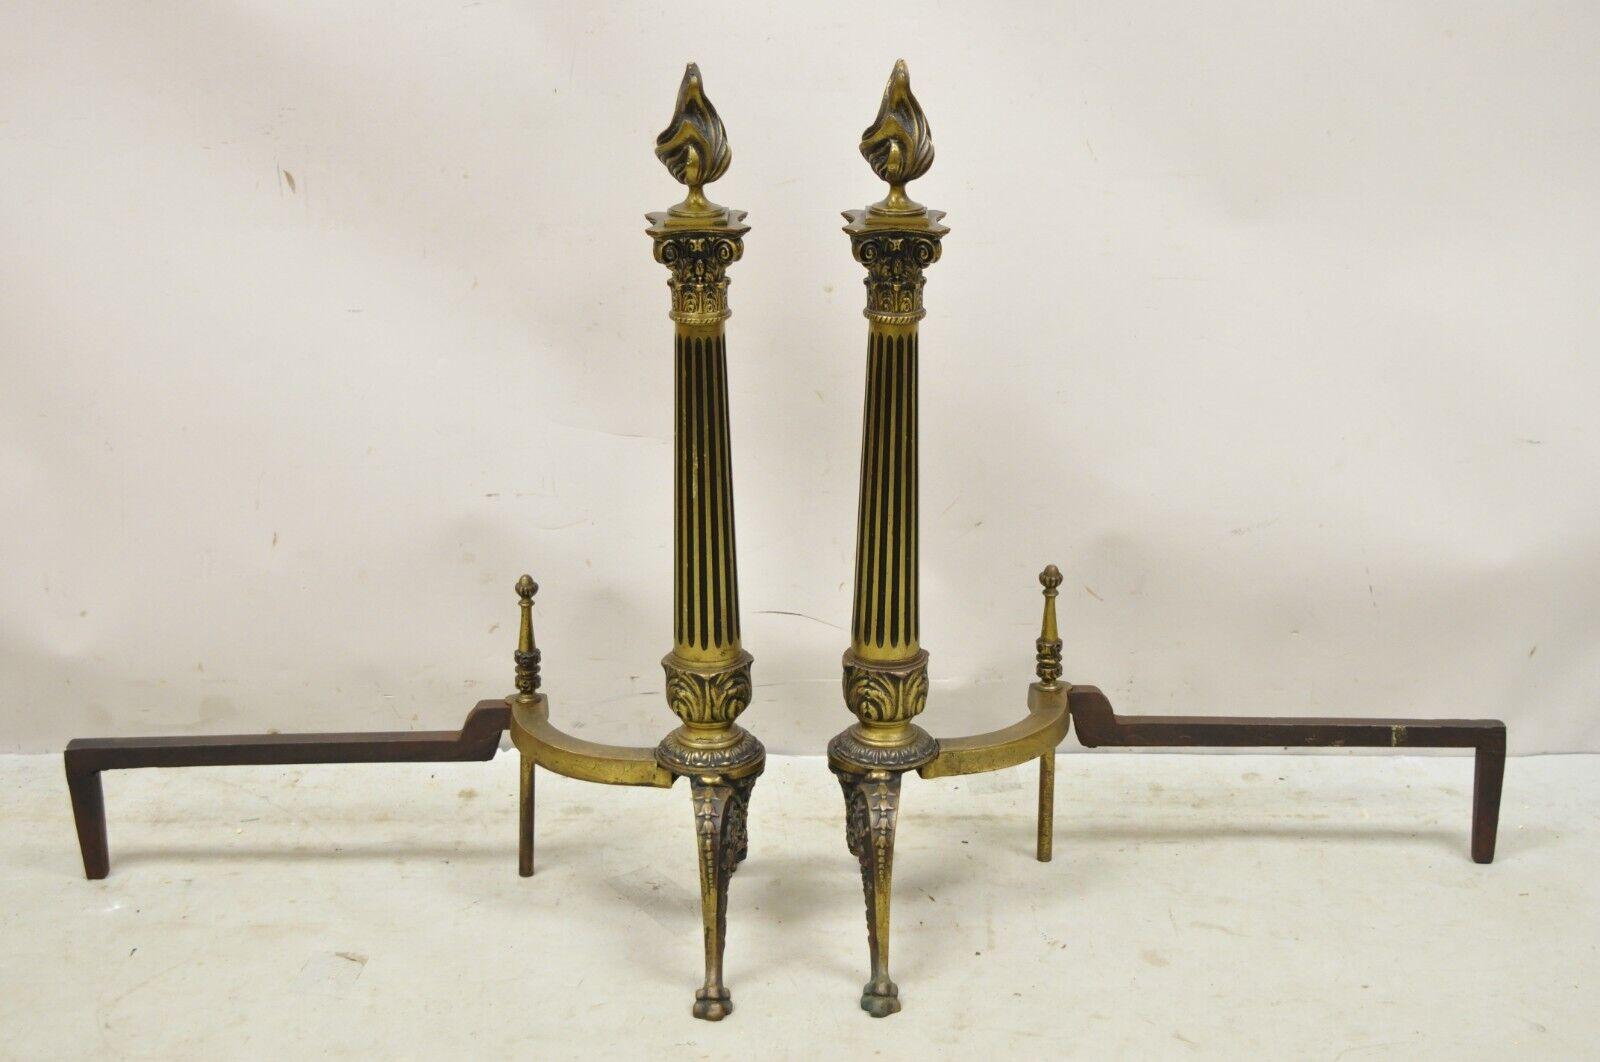 Antique French Empire Style Bronze Column Form Flame Finial Andirons - a Pair For Sale 6